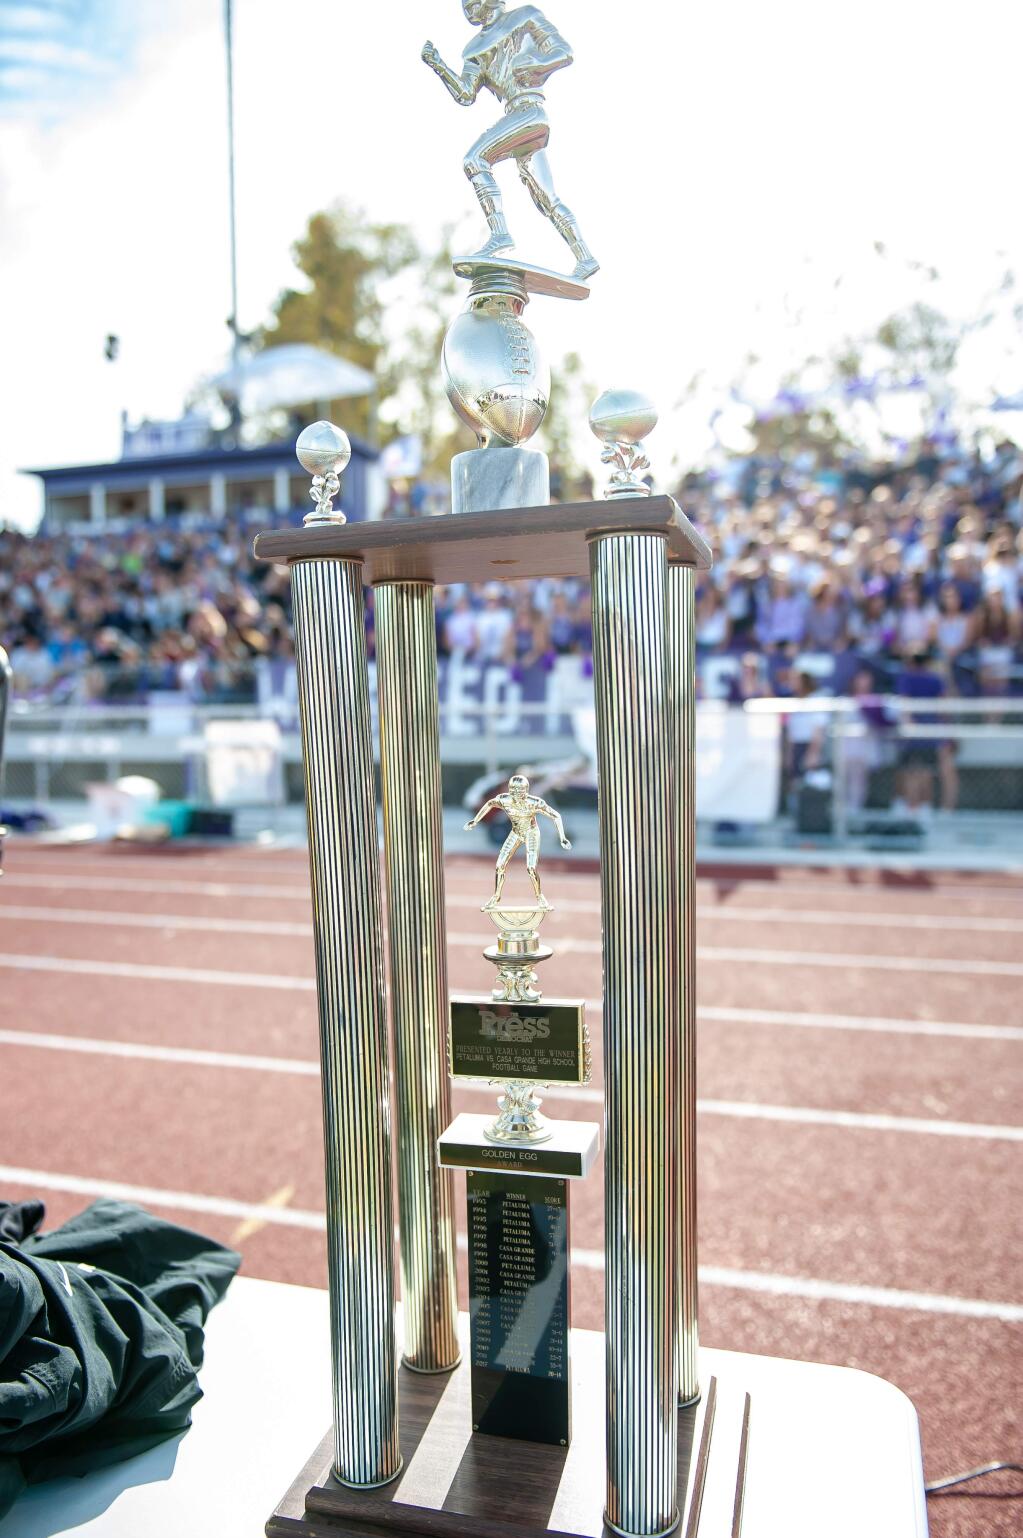 The Press Democrat sponsors the Golden Egg, the trophy awarded annually to the winner of the Egg Bowl. For 2018-19, Casa Grande will hold the honor. ANDREW GOTSHALL/FOR THE ARGUS-COURIER